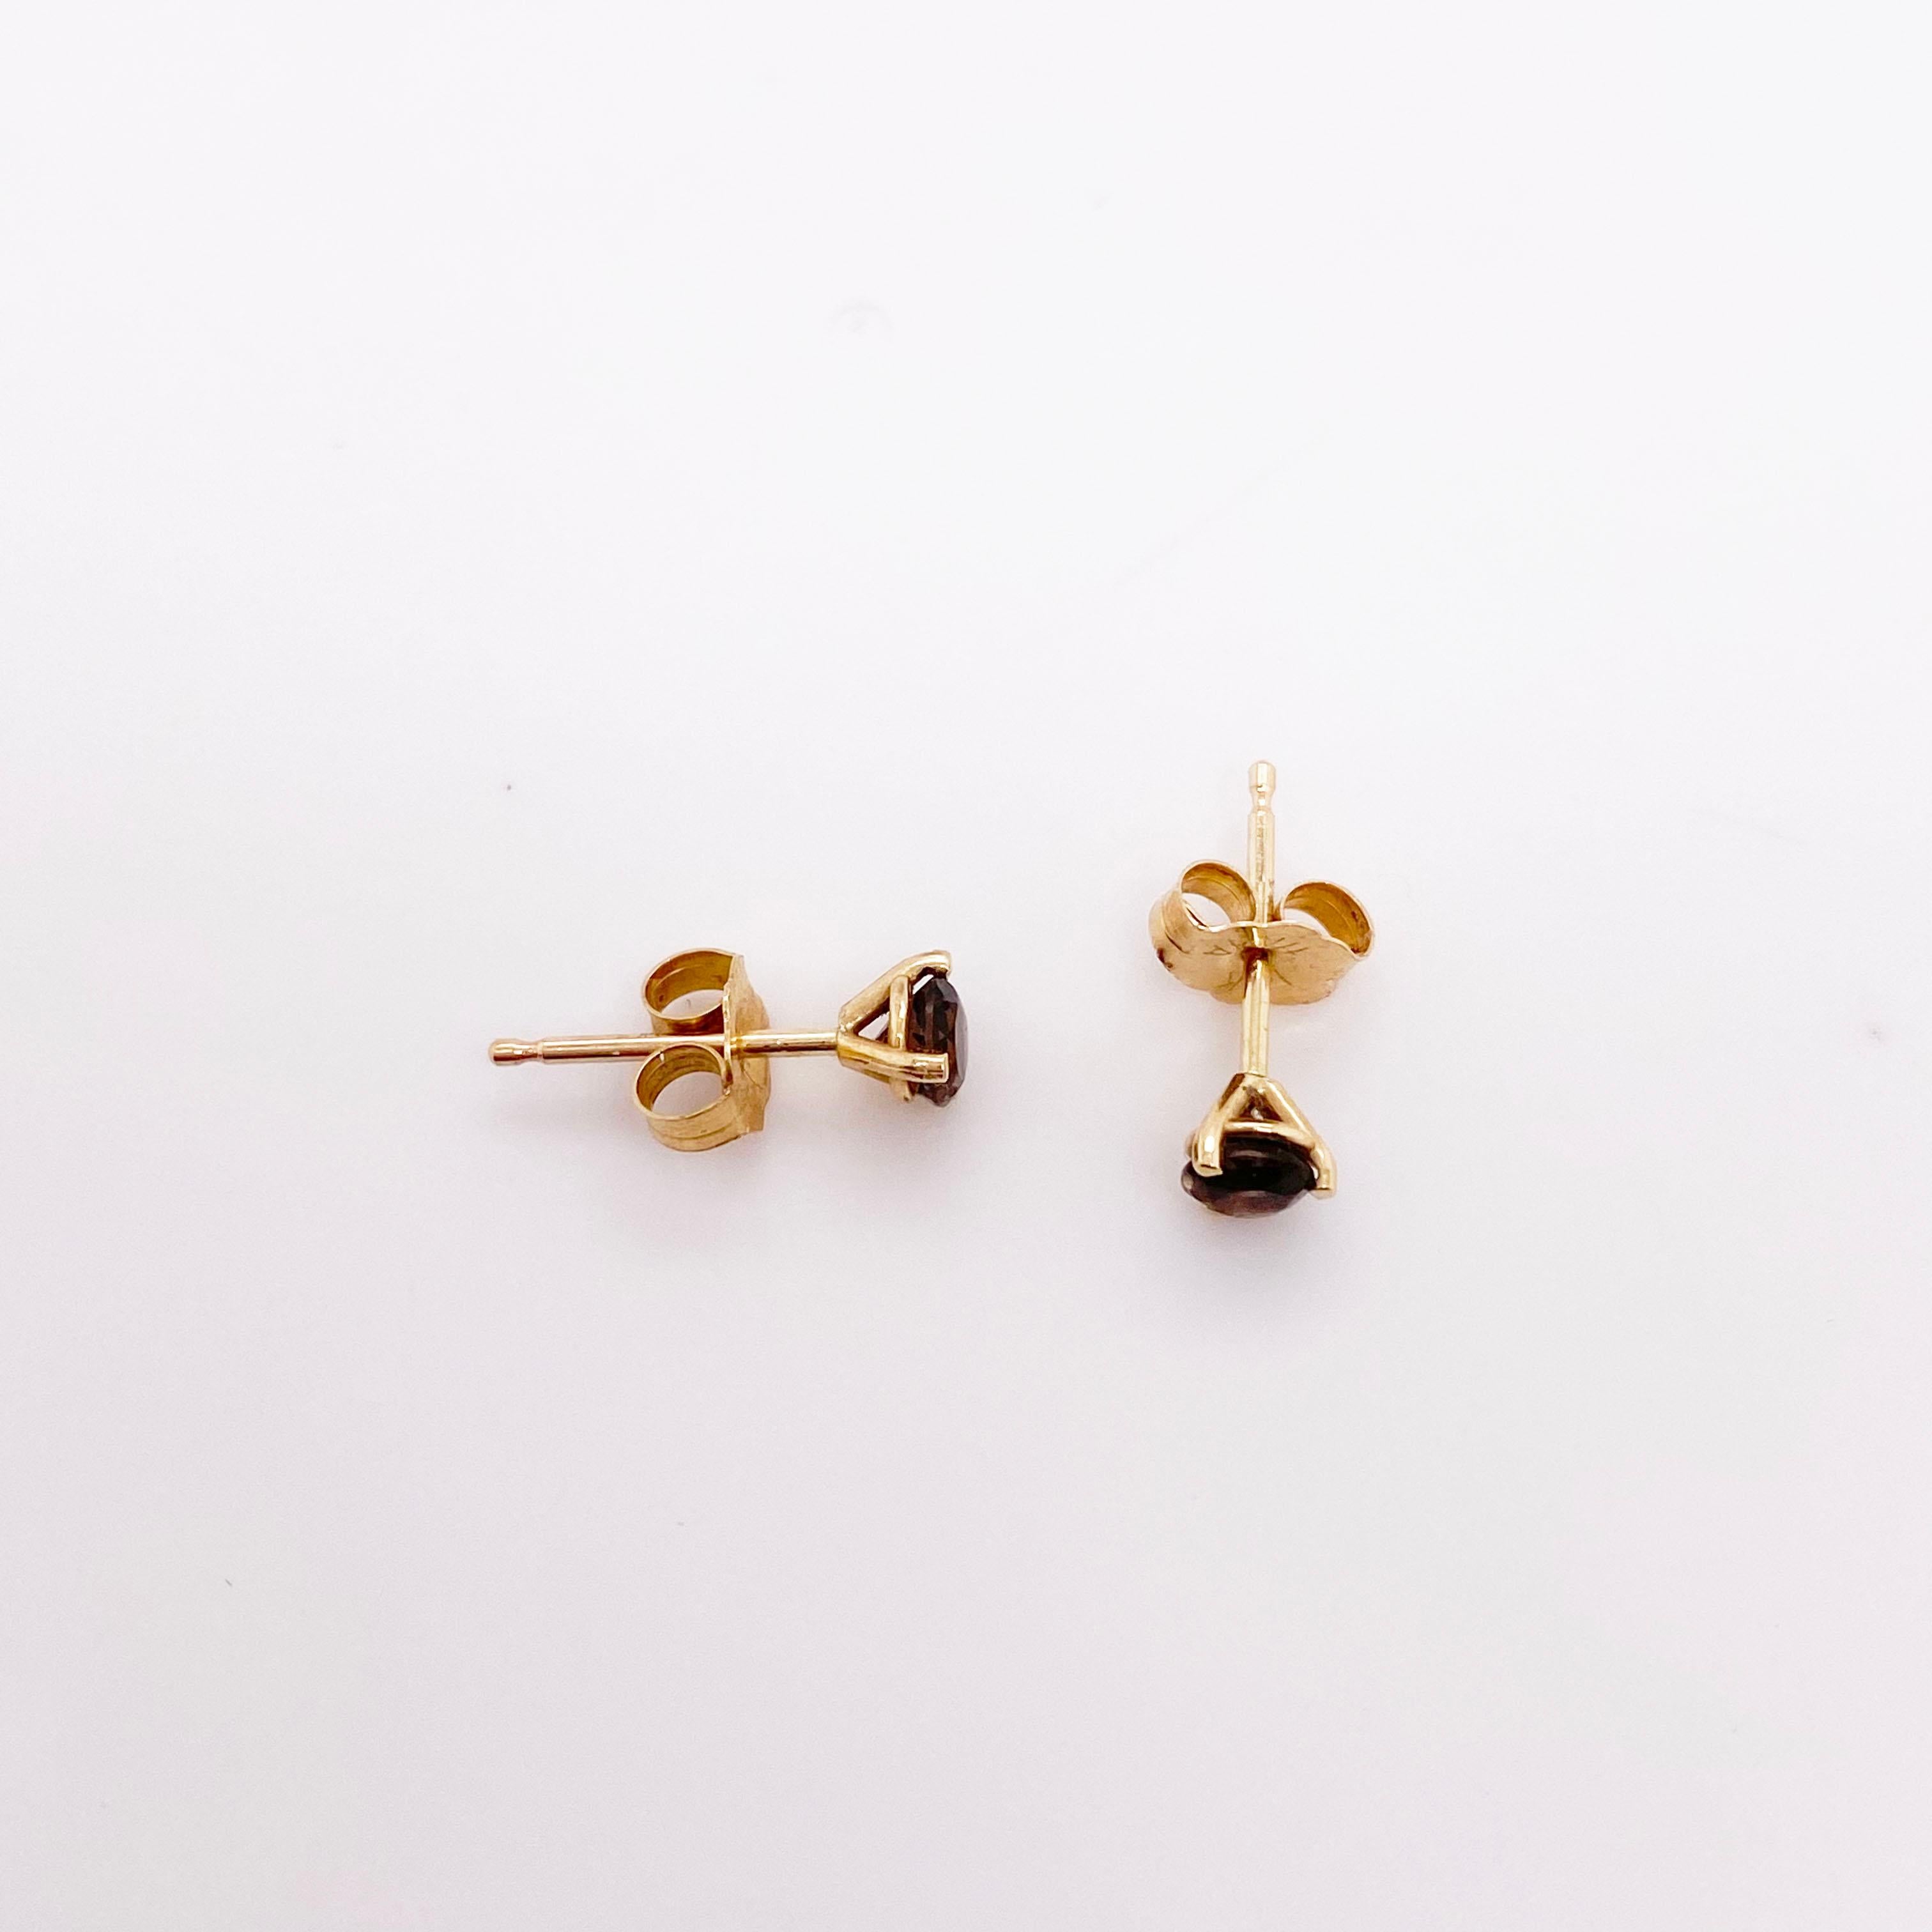 These are the perfect earrings for a minimalist look! The earrings are 3.5 mm (.11 carats each). The details for these gorgeous earrings are listed below:
Metal Quality: 14 kt Yellow Gold  
Earring Type: Stud
Gemstone: Smokey Quartz
Gemstone Weight: